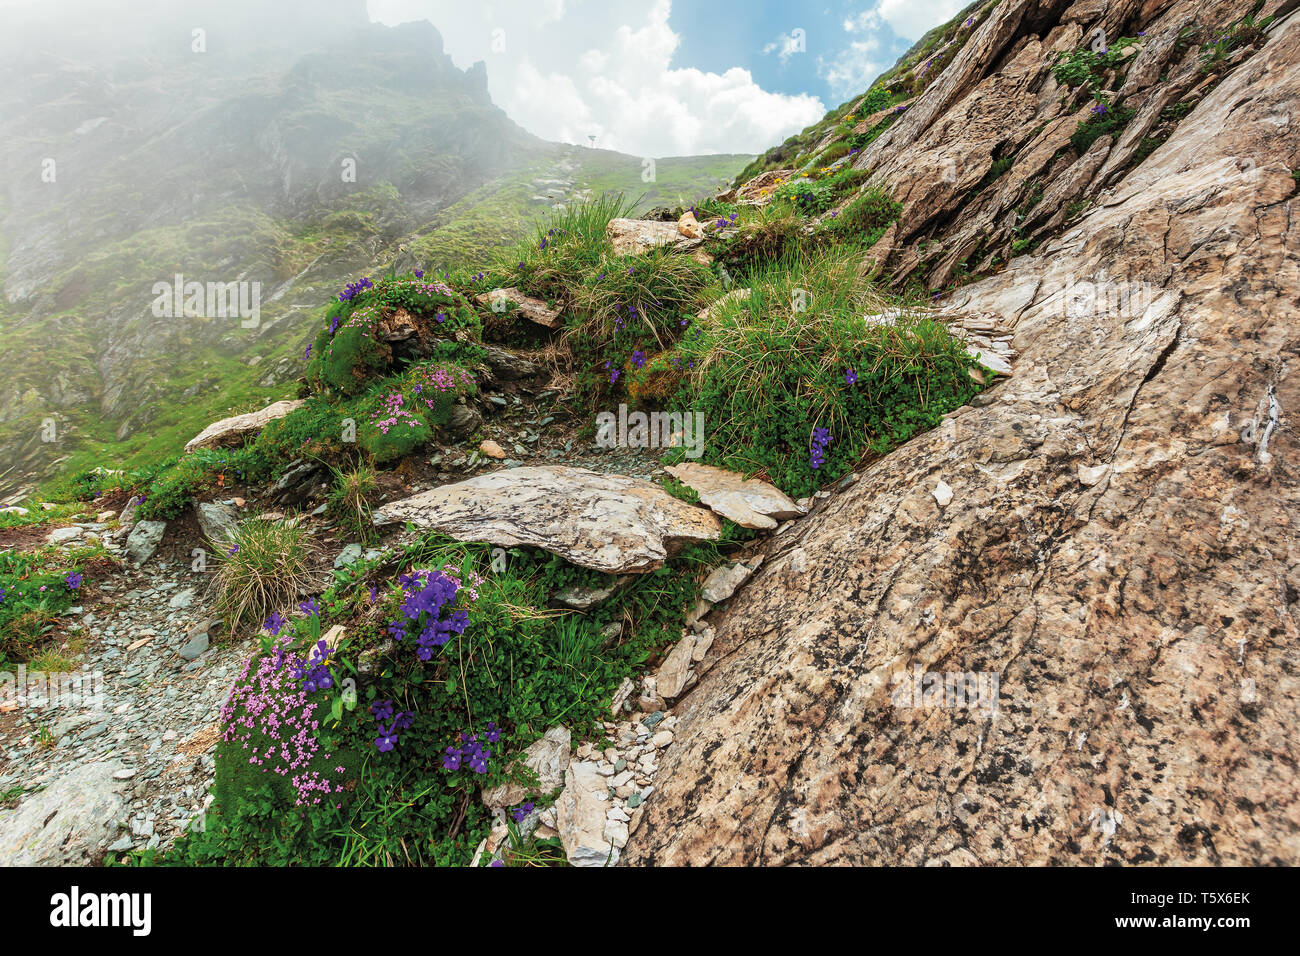 flora of the fagaras mountain. flowers among the grass on the edge of a steep rocky slope. foggy weather with cloudy sky on the background Stock Photo